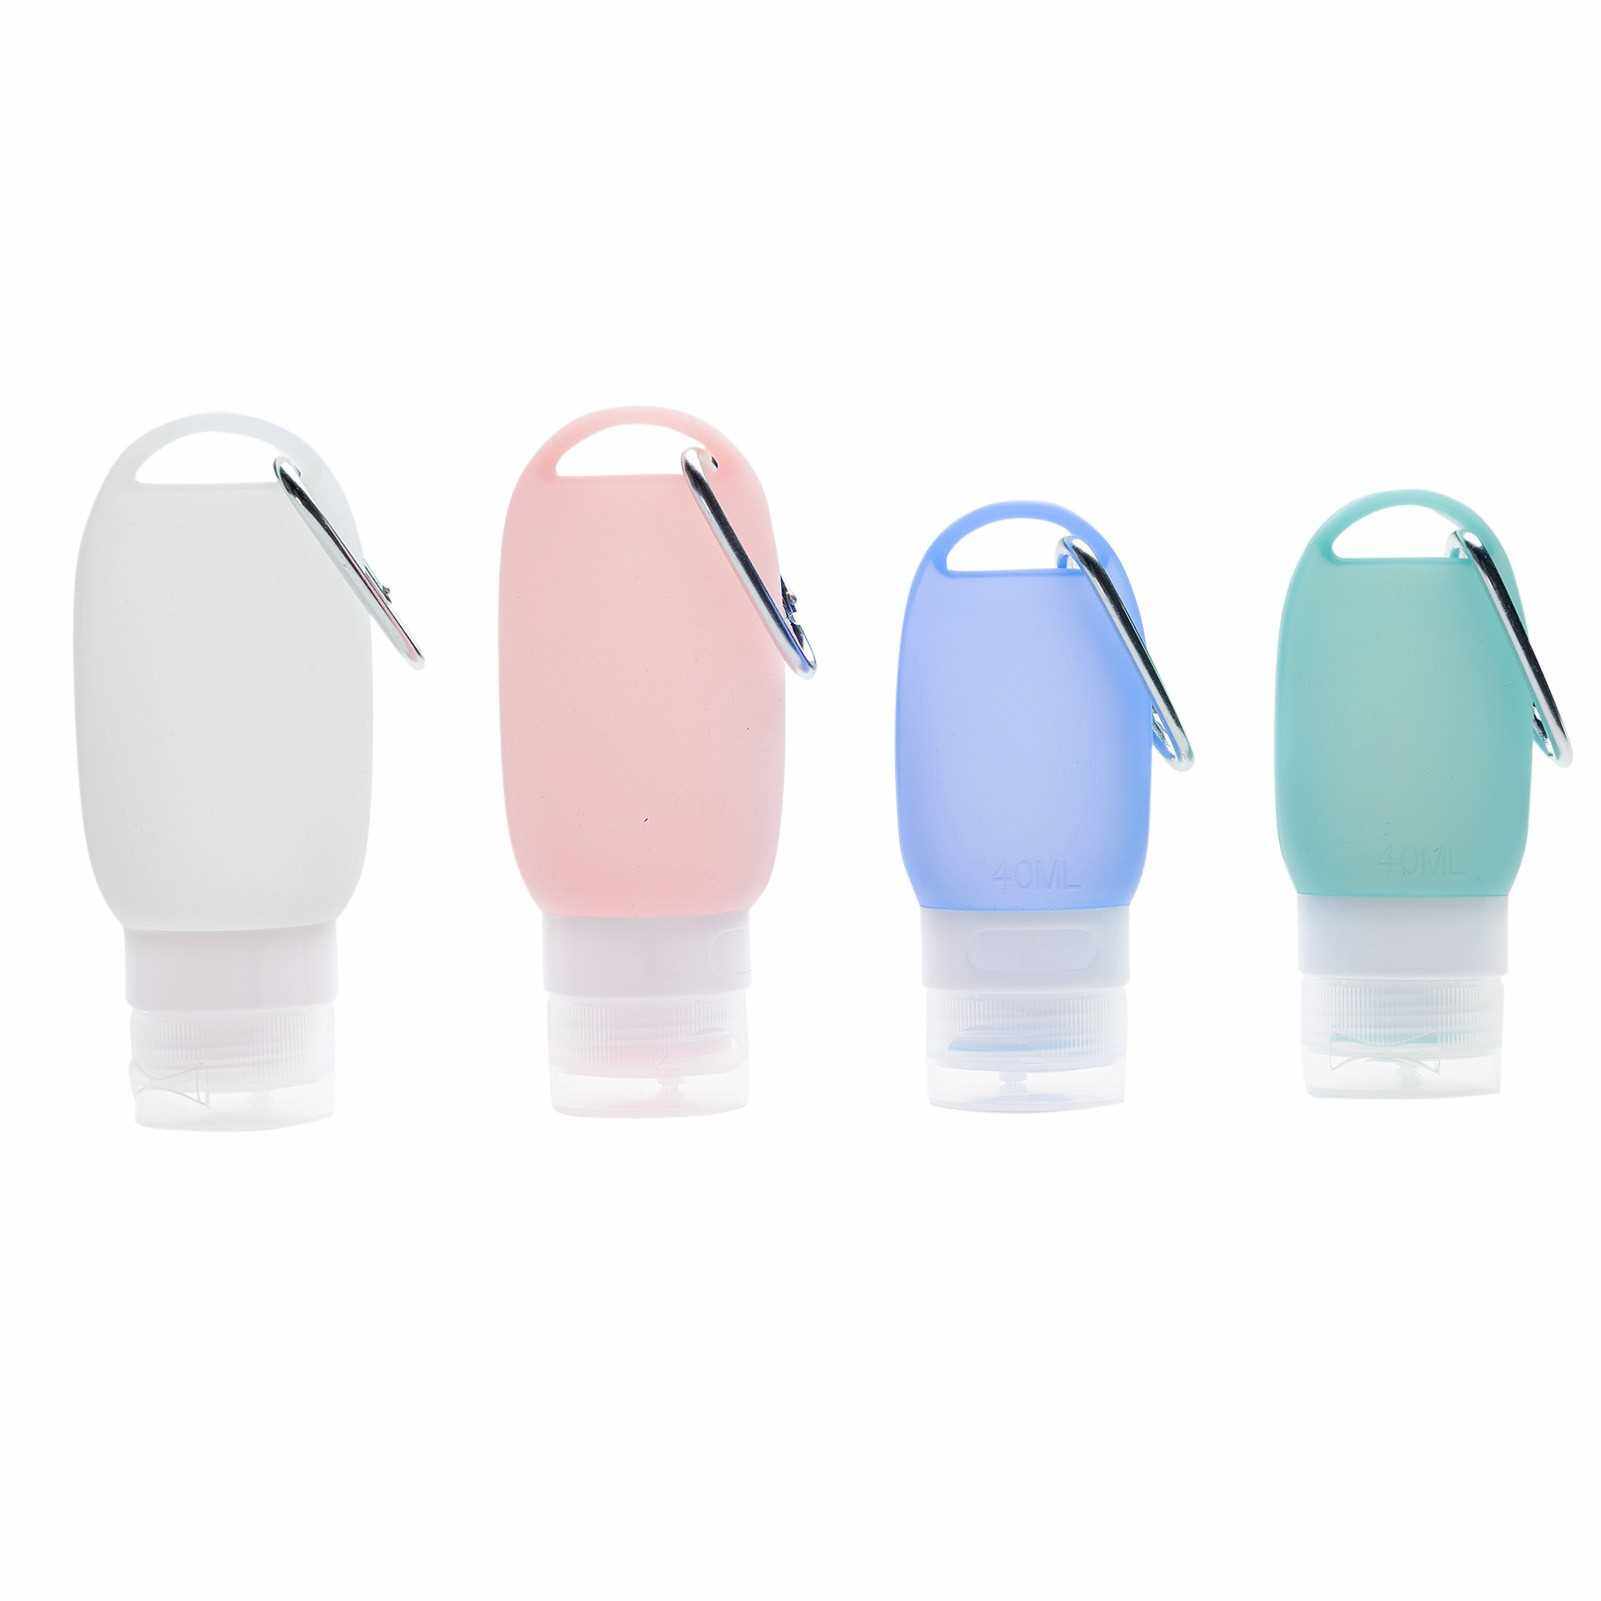 3PCS Travel Bottles with Snap Hook Hanging Soft Silicone Portable Refillable Empty Containers for Hand Sanitizer Shampoo Flip Cap School Work Outdoor (Turquoise)